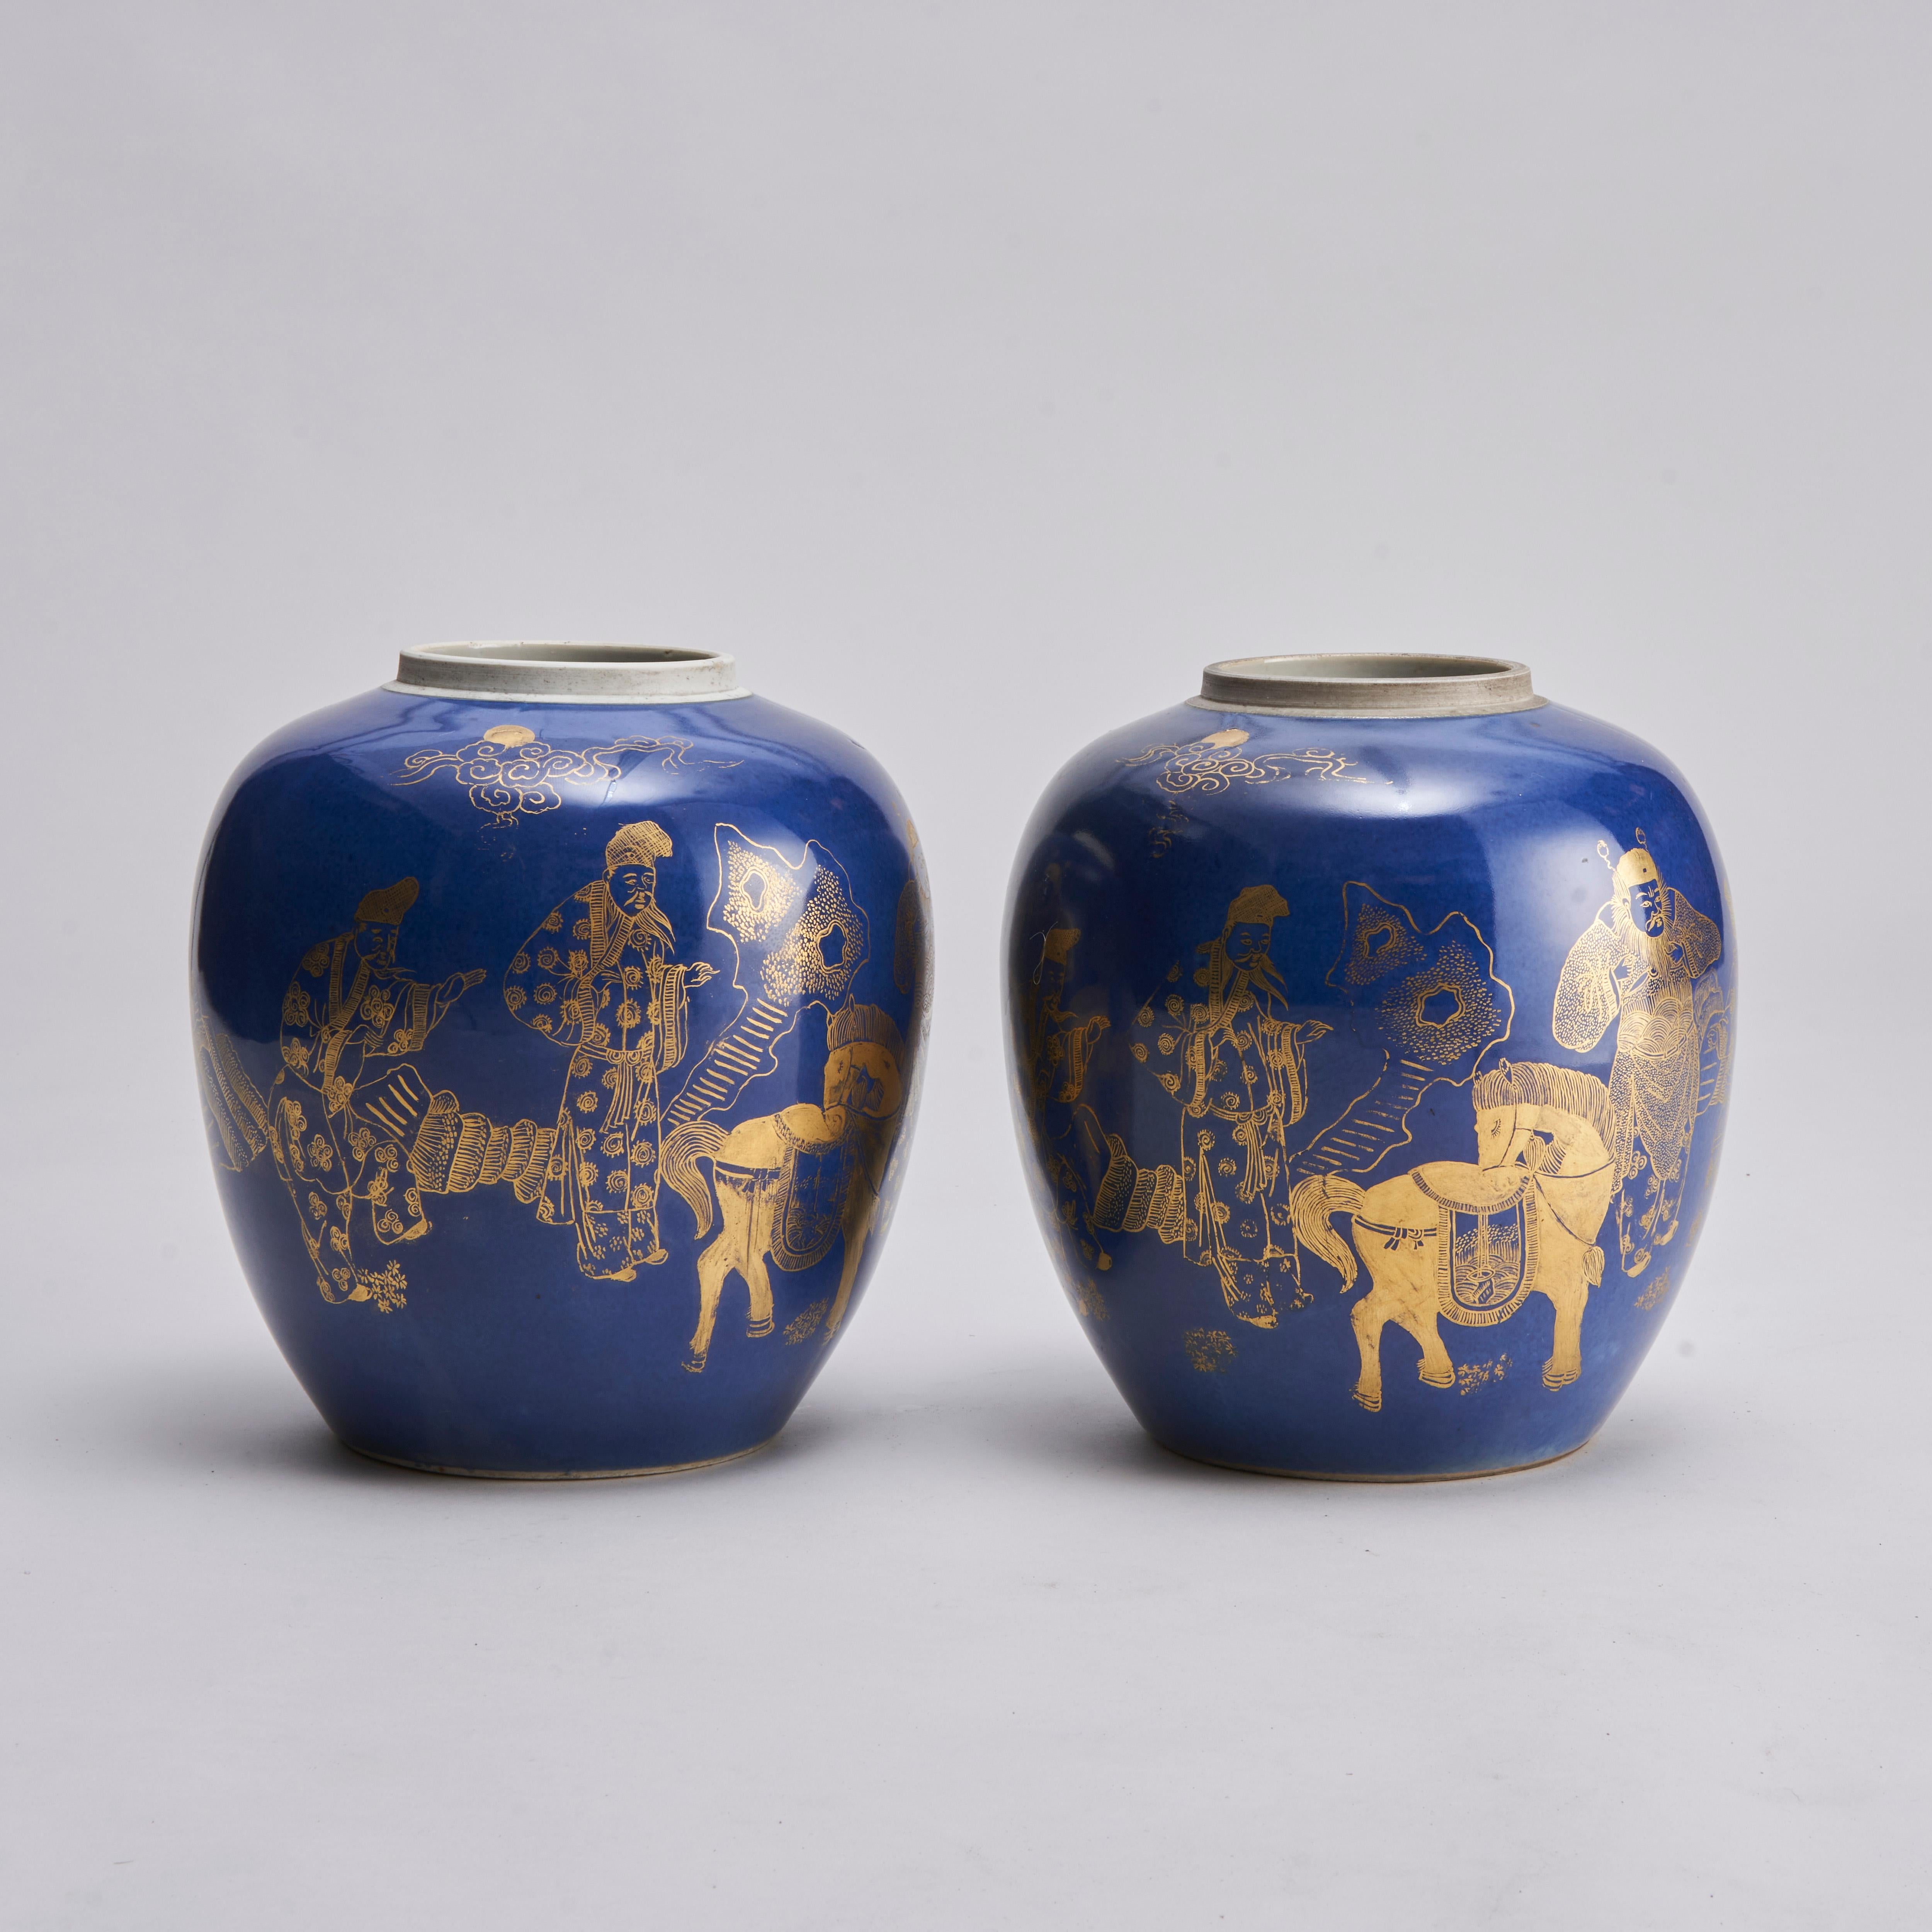 Porcelain A pair of 19th Century Chinese powder blue jars with gold decoration depic For Sale